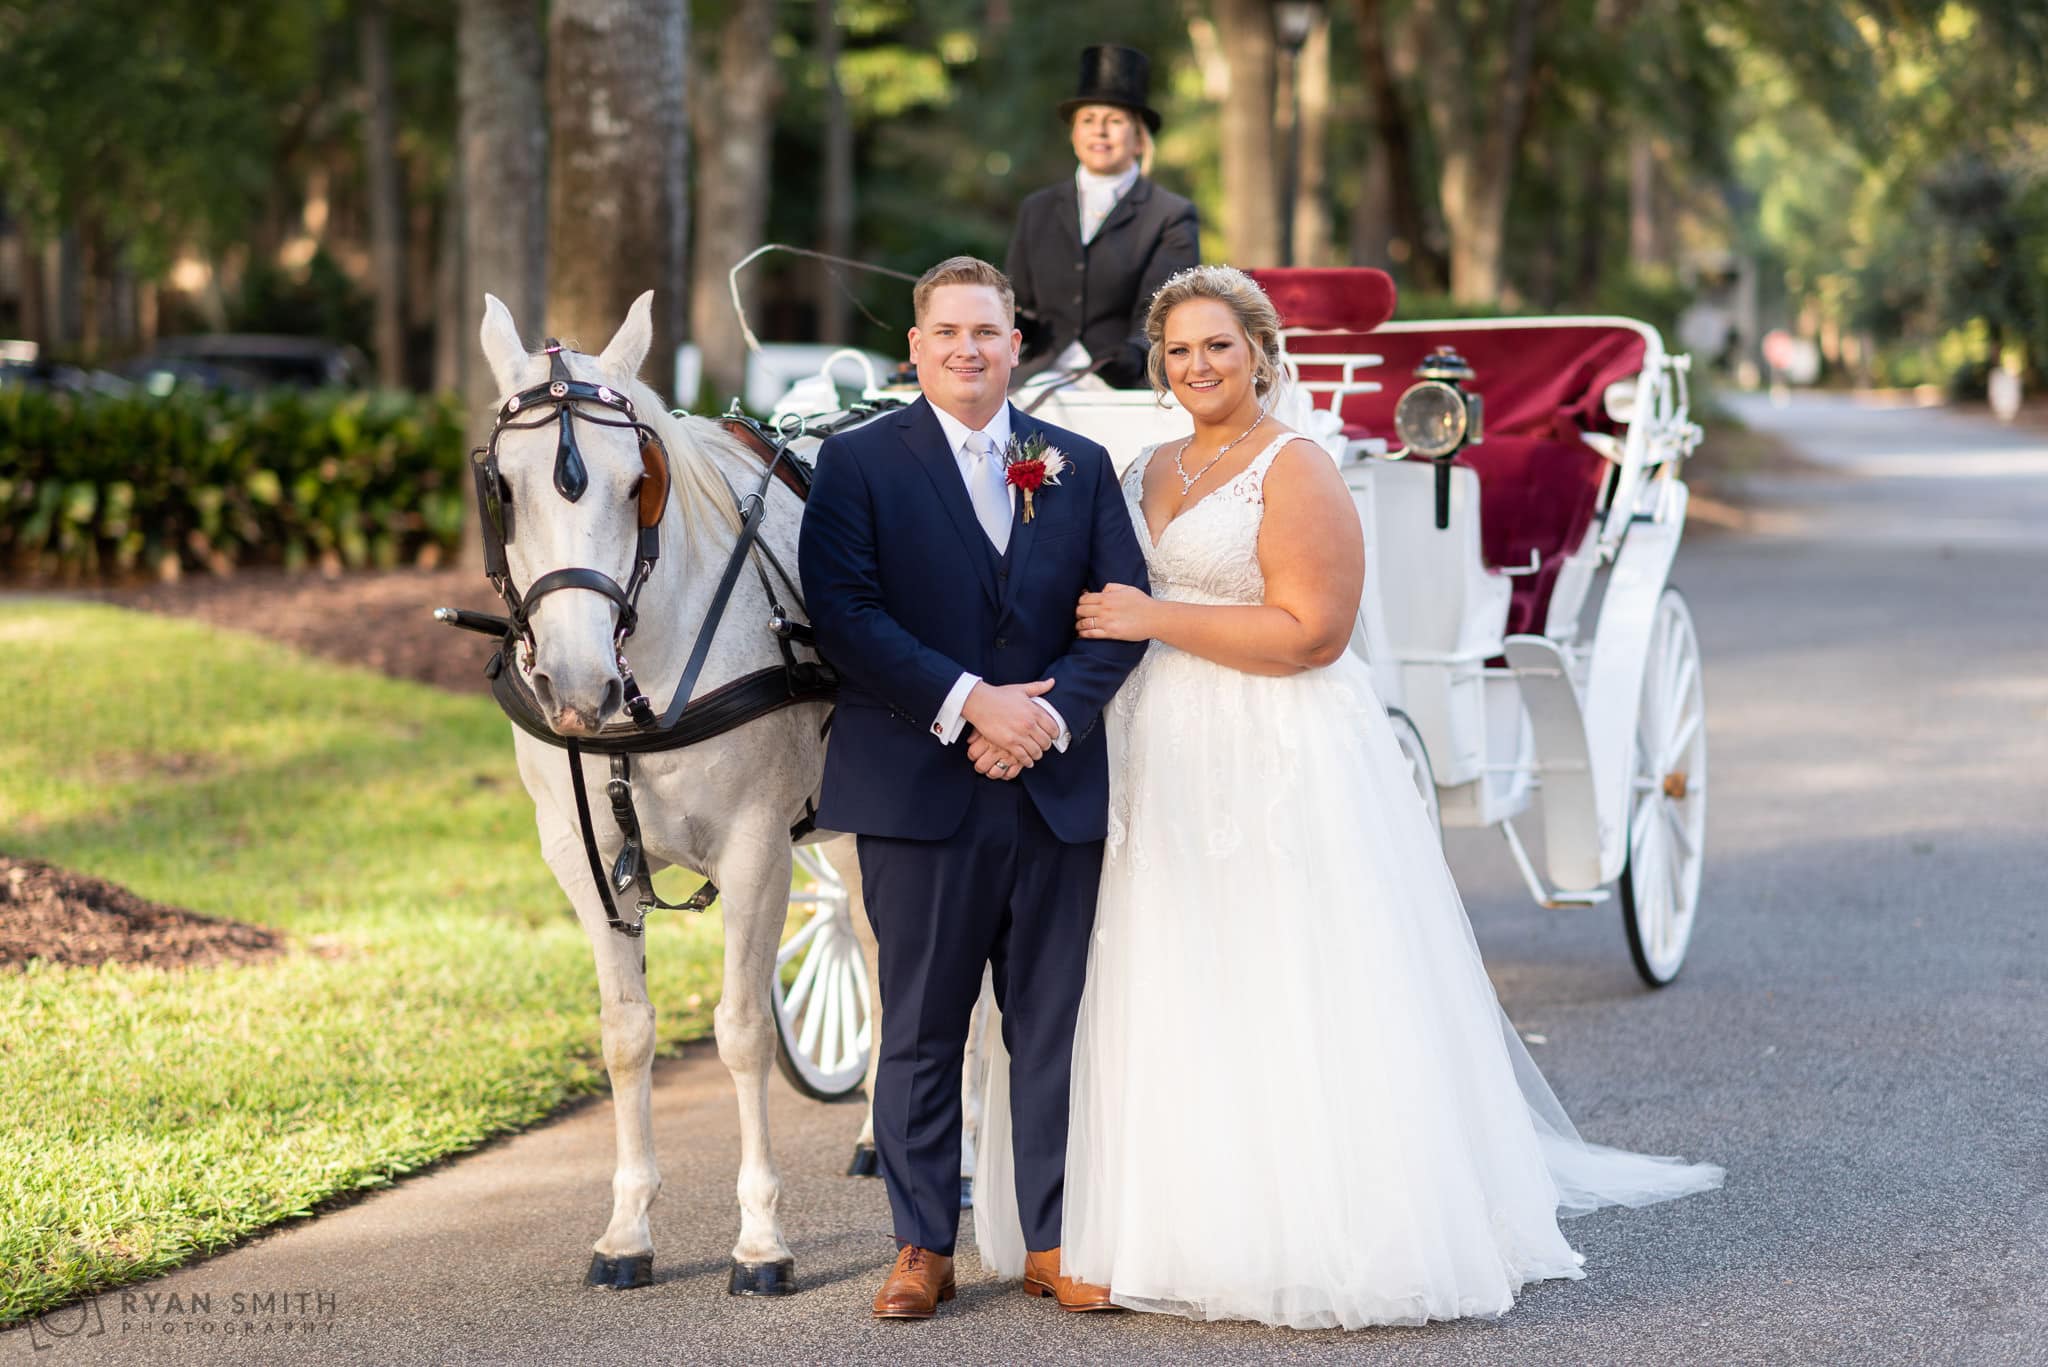 Bride holding arm of groom by the horse and carriage